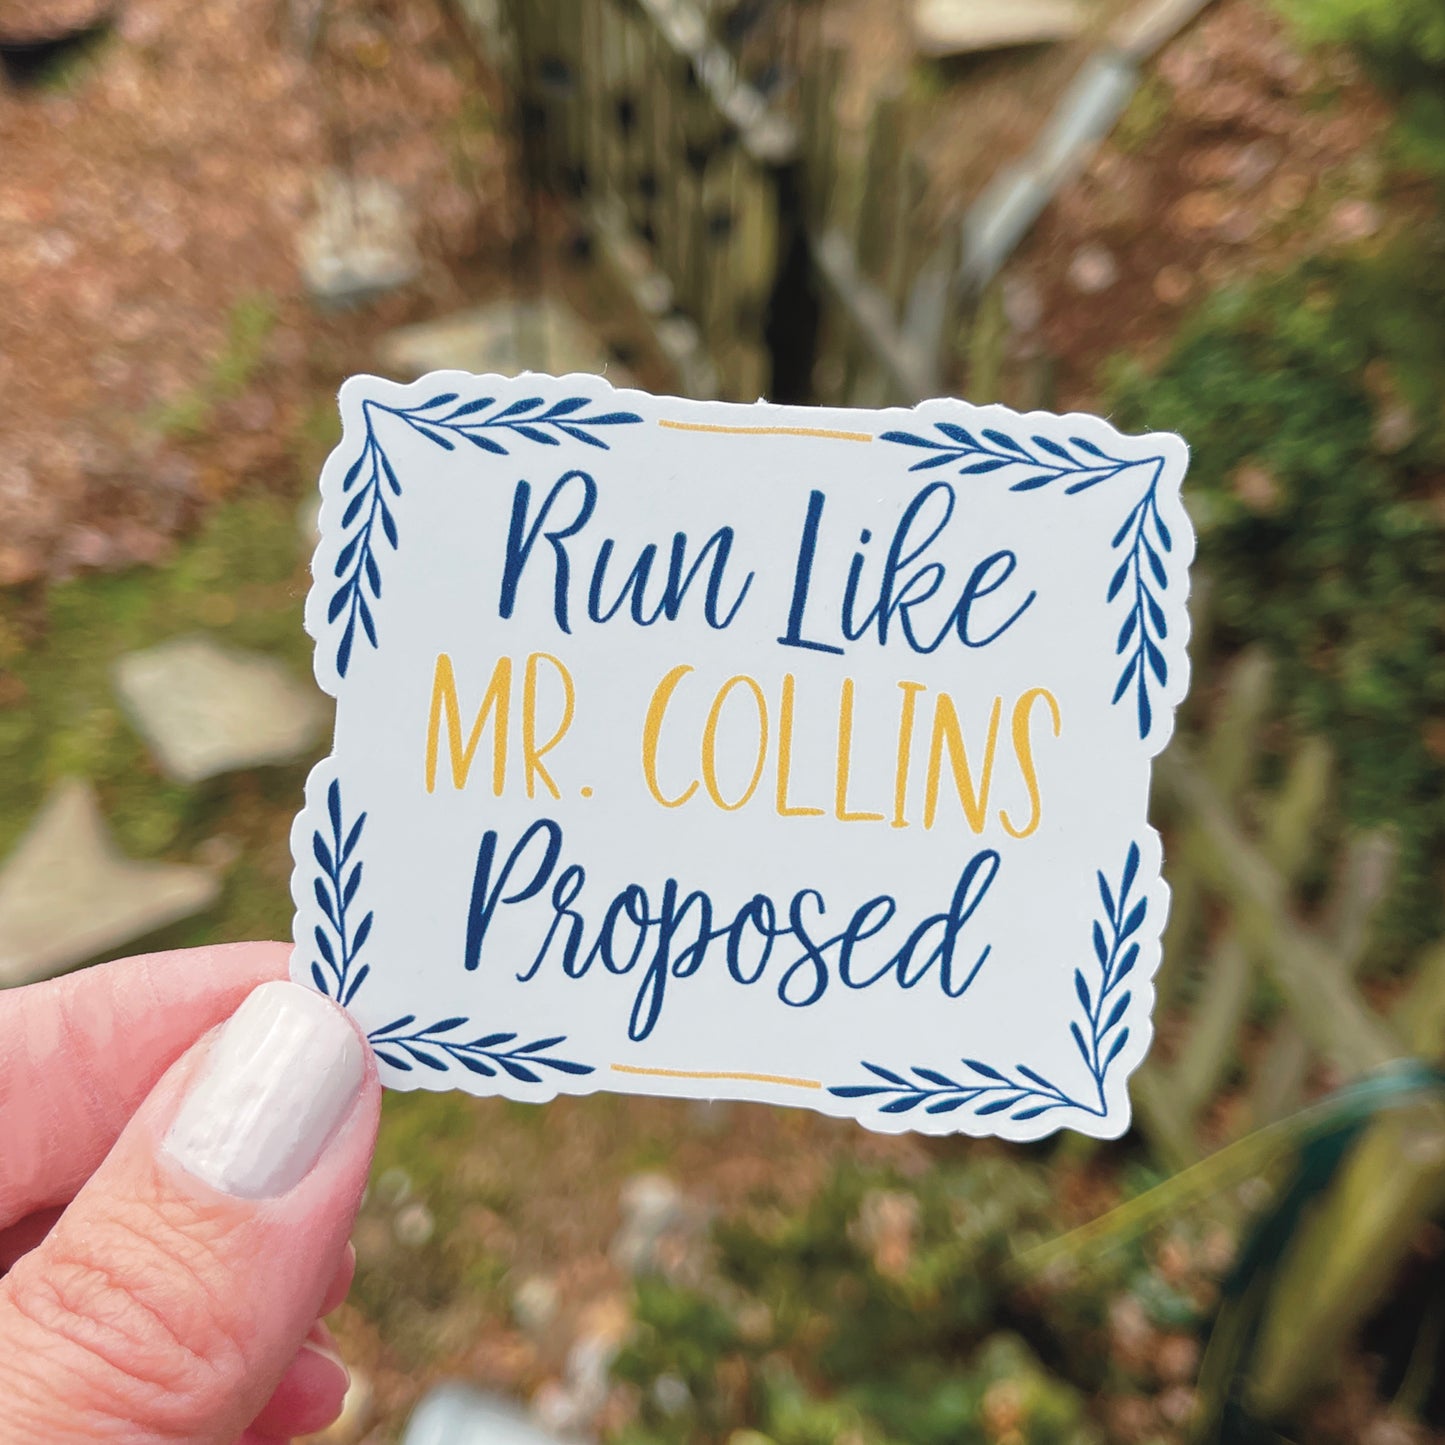 Run Like Mr. Collins Proposed Jane Austen Pride and Prejudice Obstinate Headstrong Girl sticker